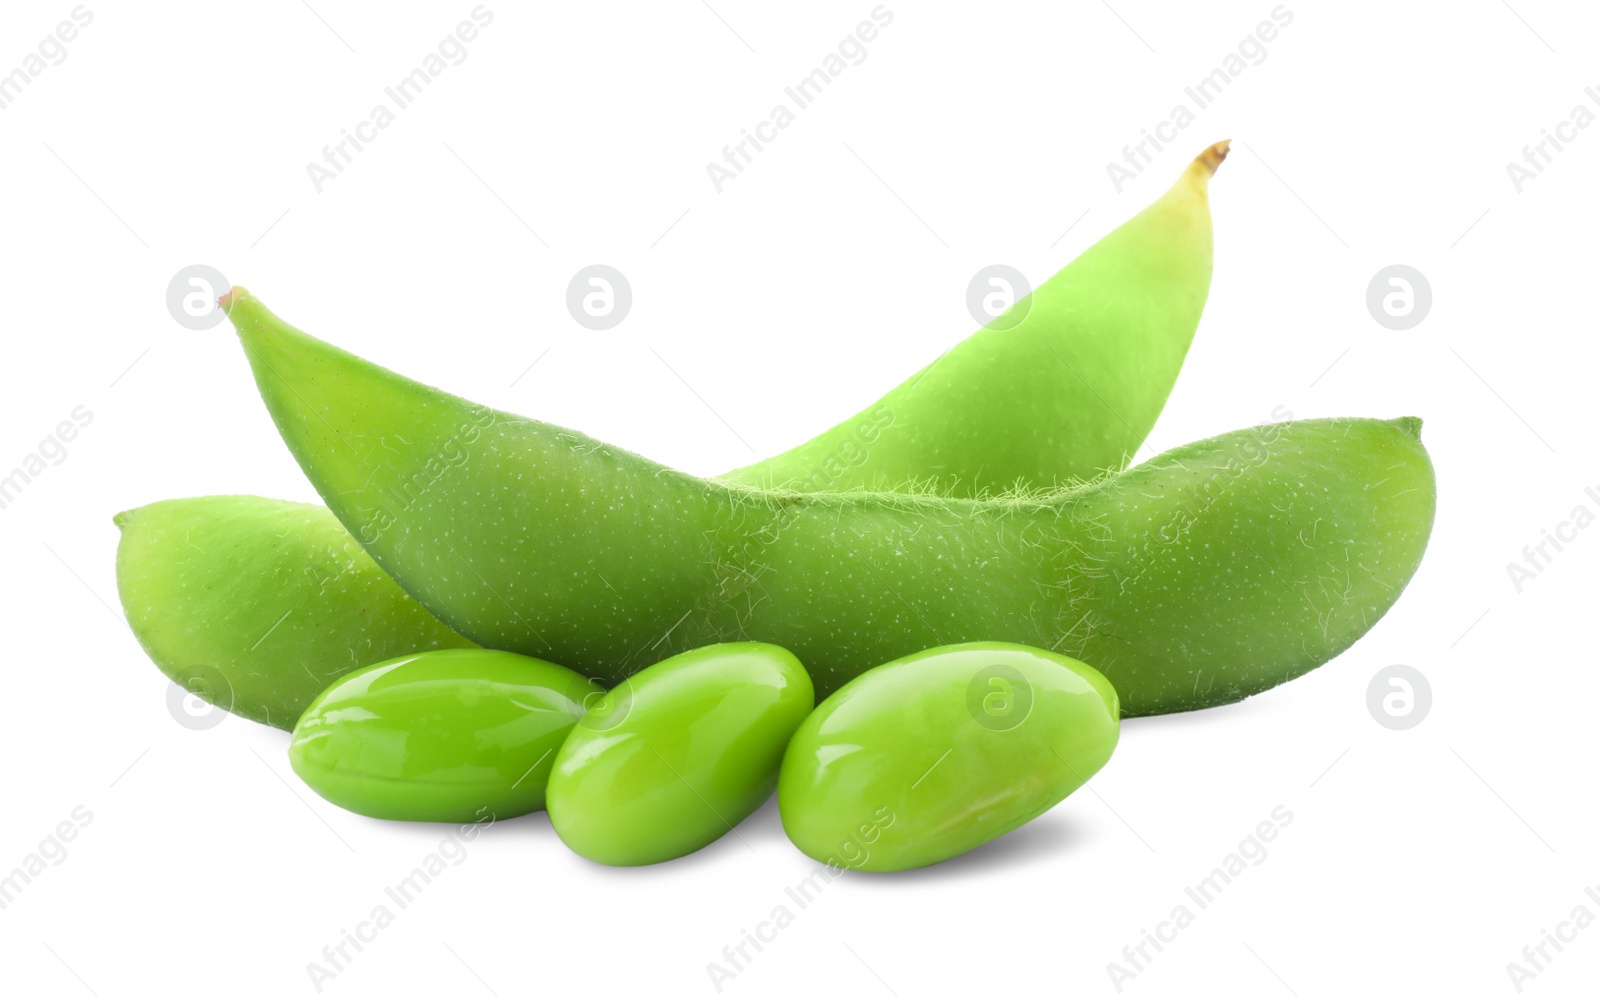 Photo of Fresh green edamame pods and beans on white background